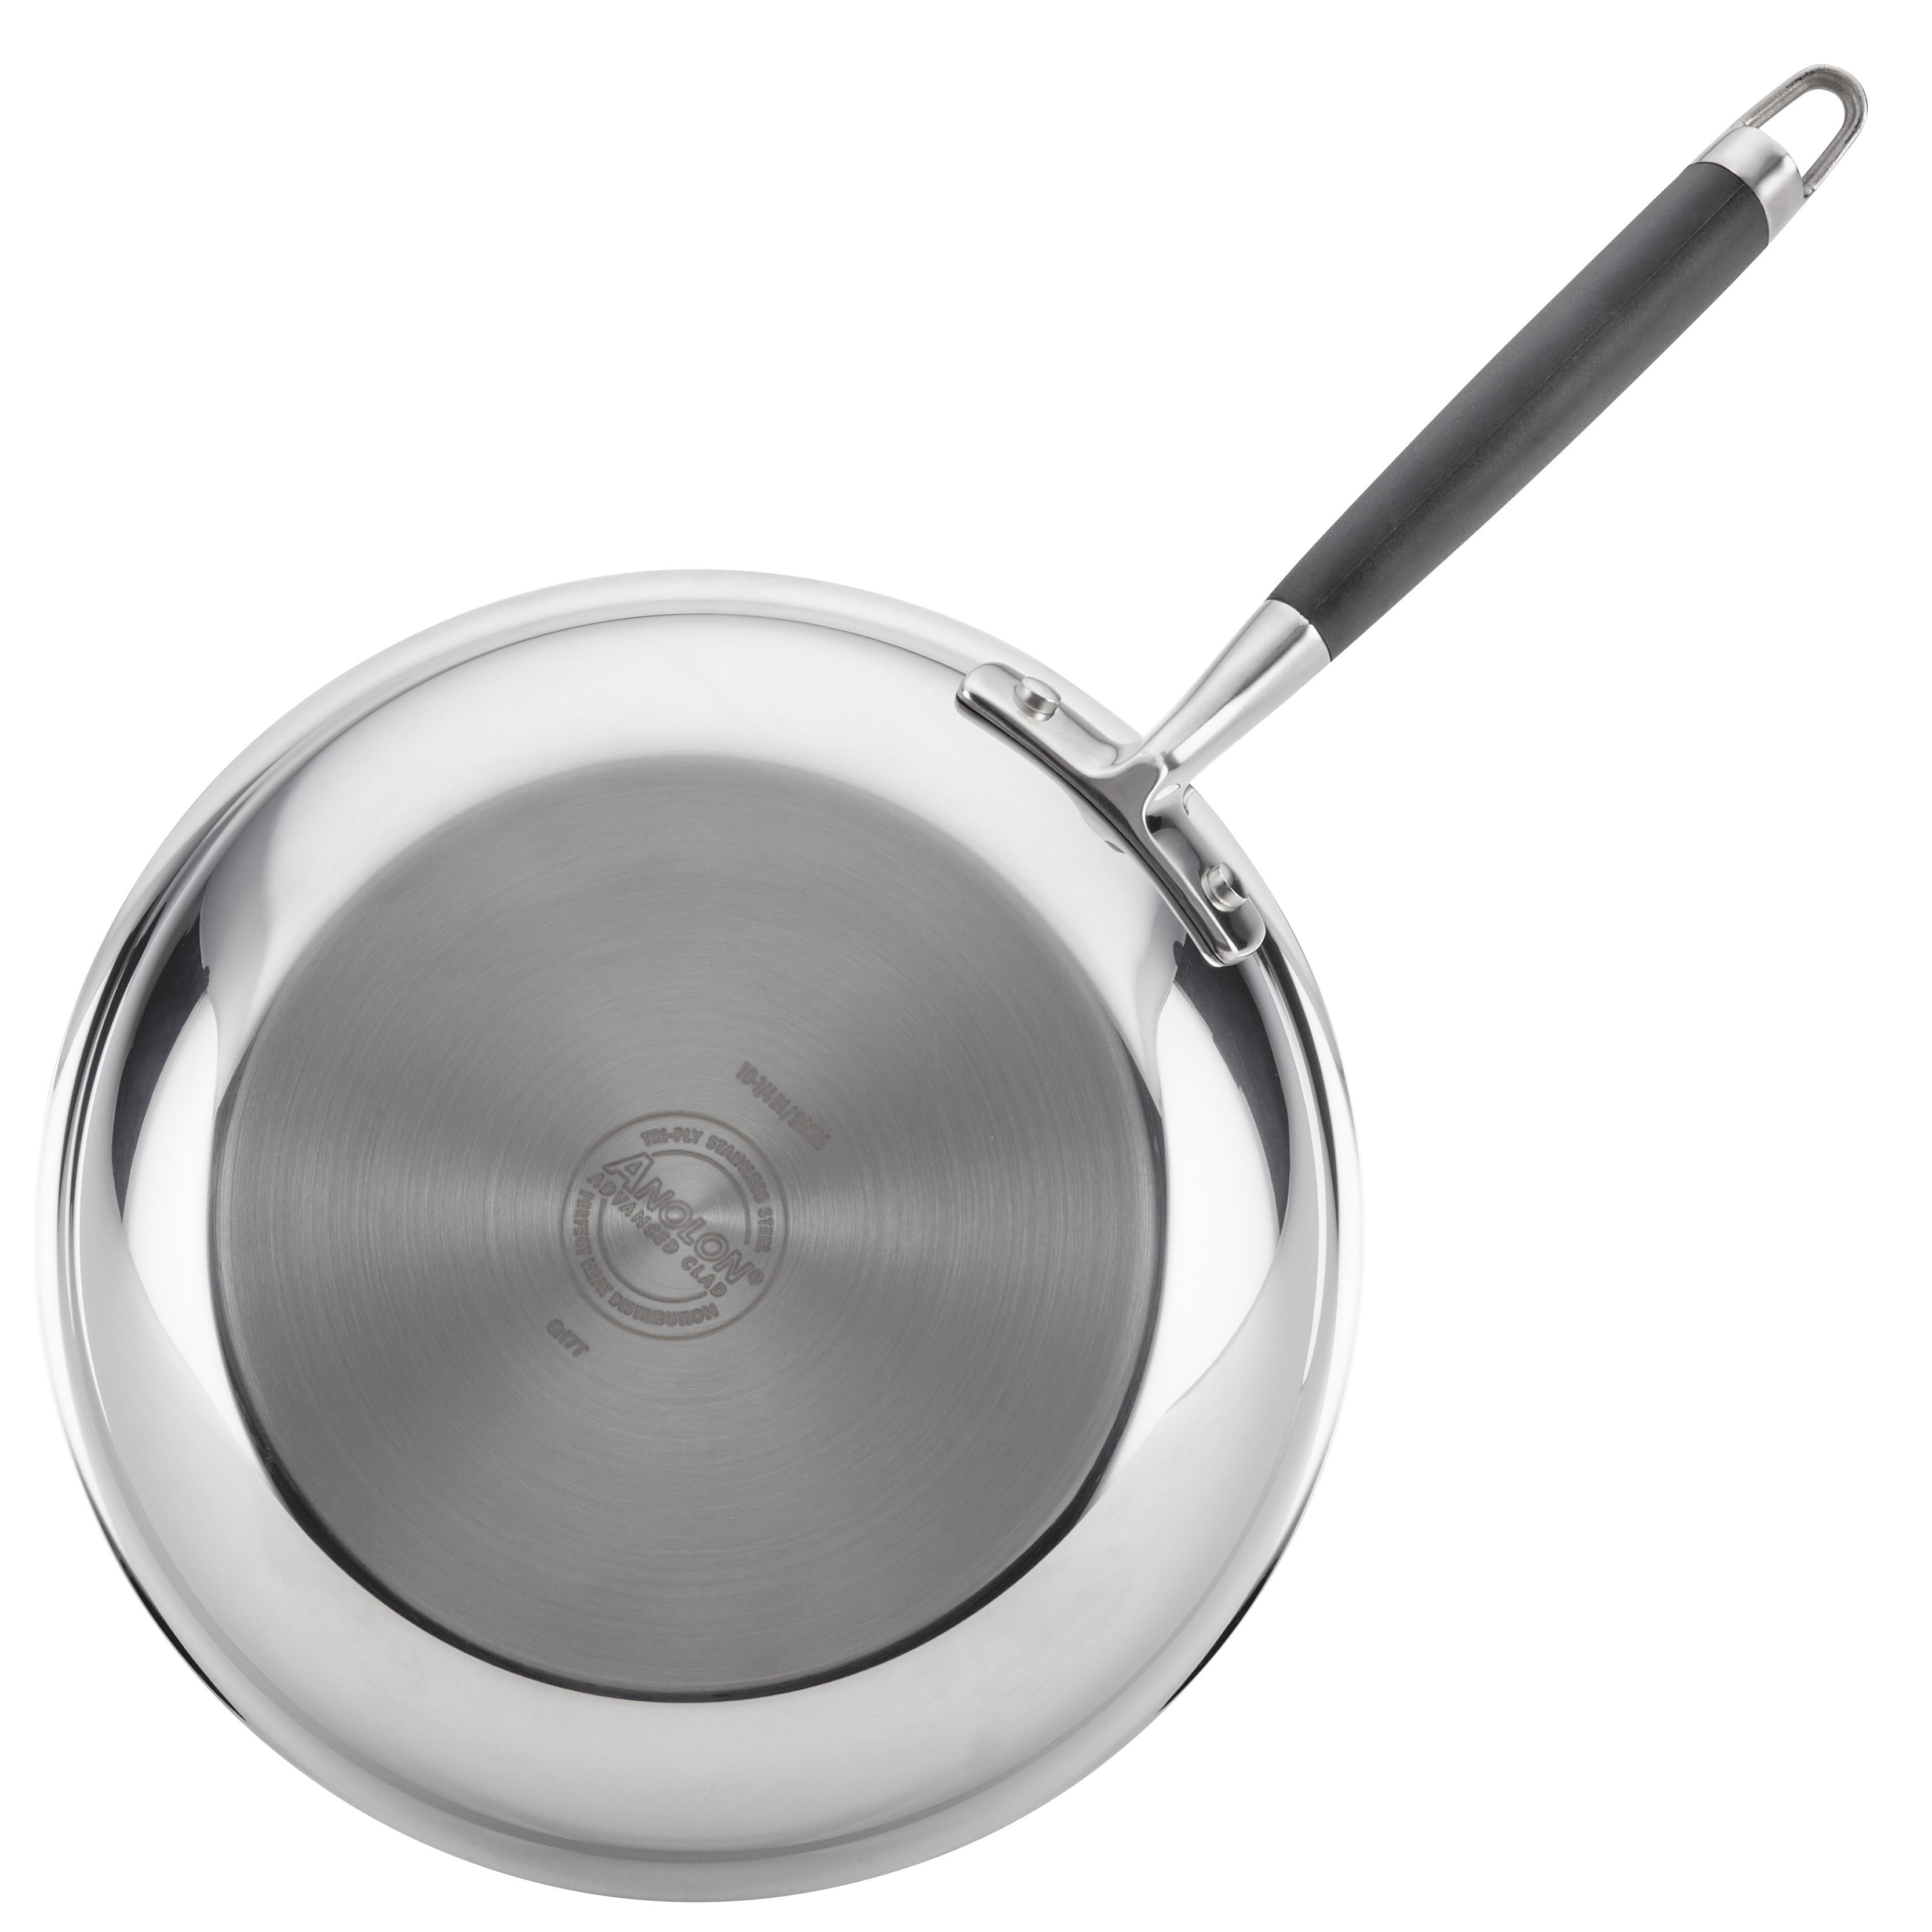 Cuisinart FCT66-22 French Classic Tri-Ply Stainless 6-Quart